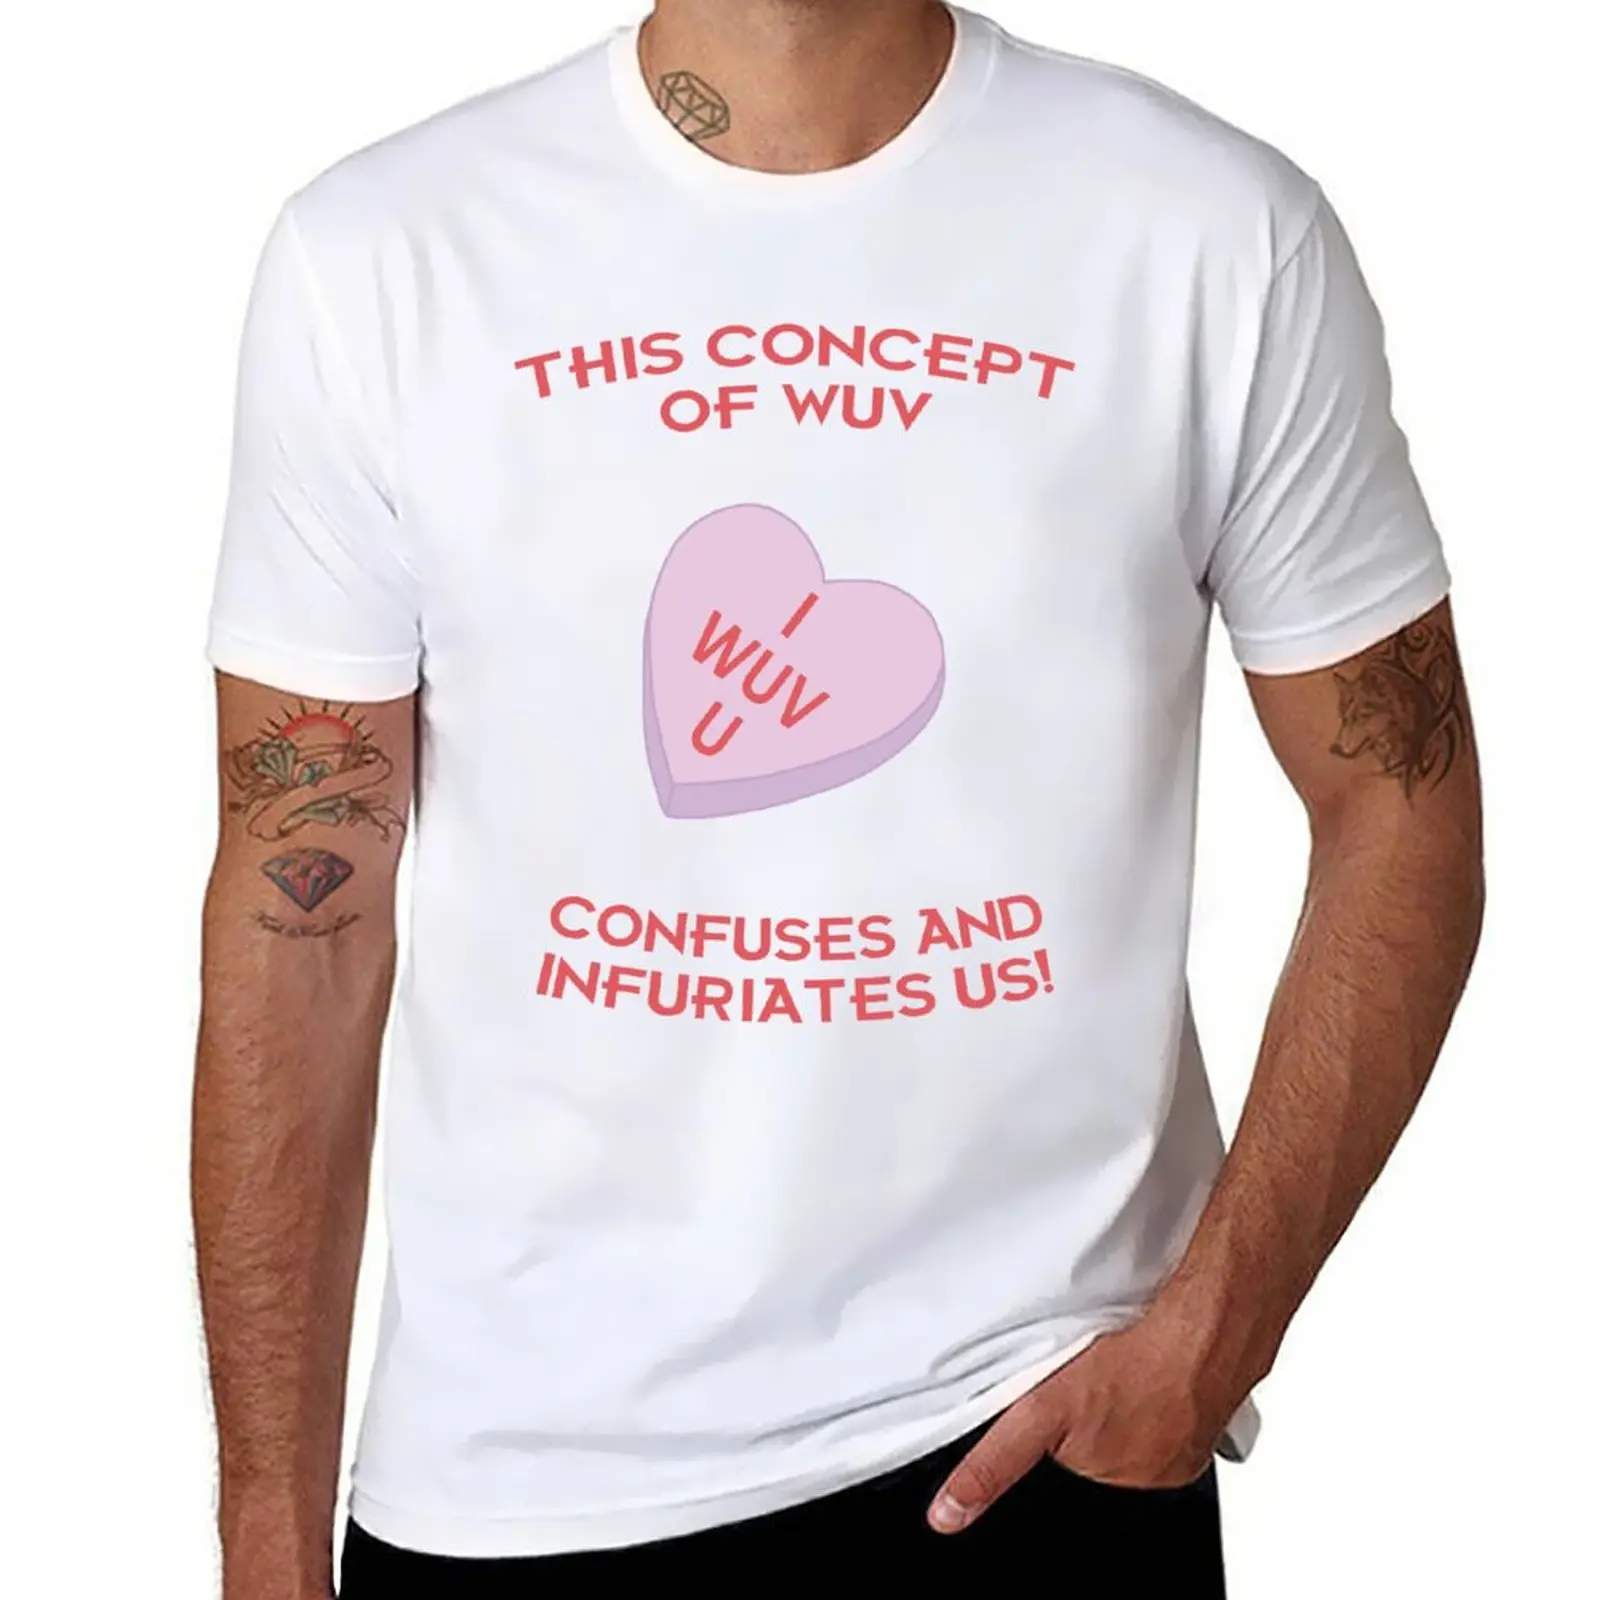 

New This Concept of Wuv Confuses and Infuriates Us! T-Shirt shirts graphic tees anime clothes mens graphic t-shirts hip hop